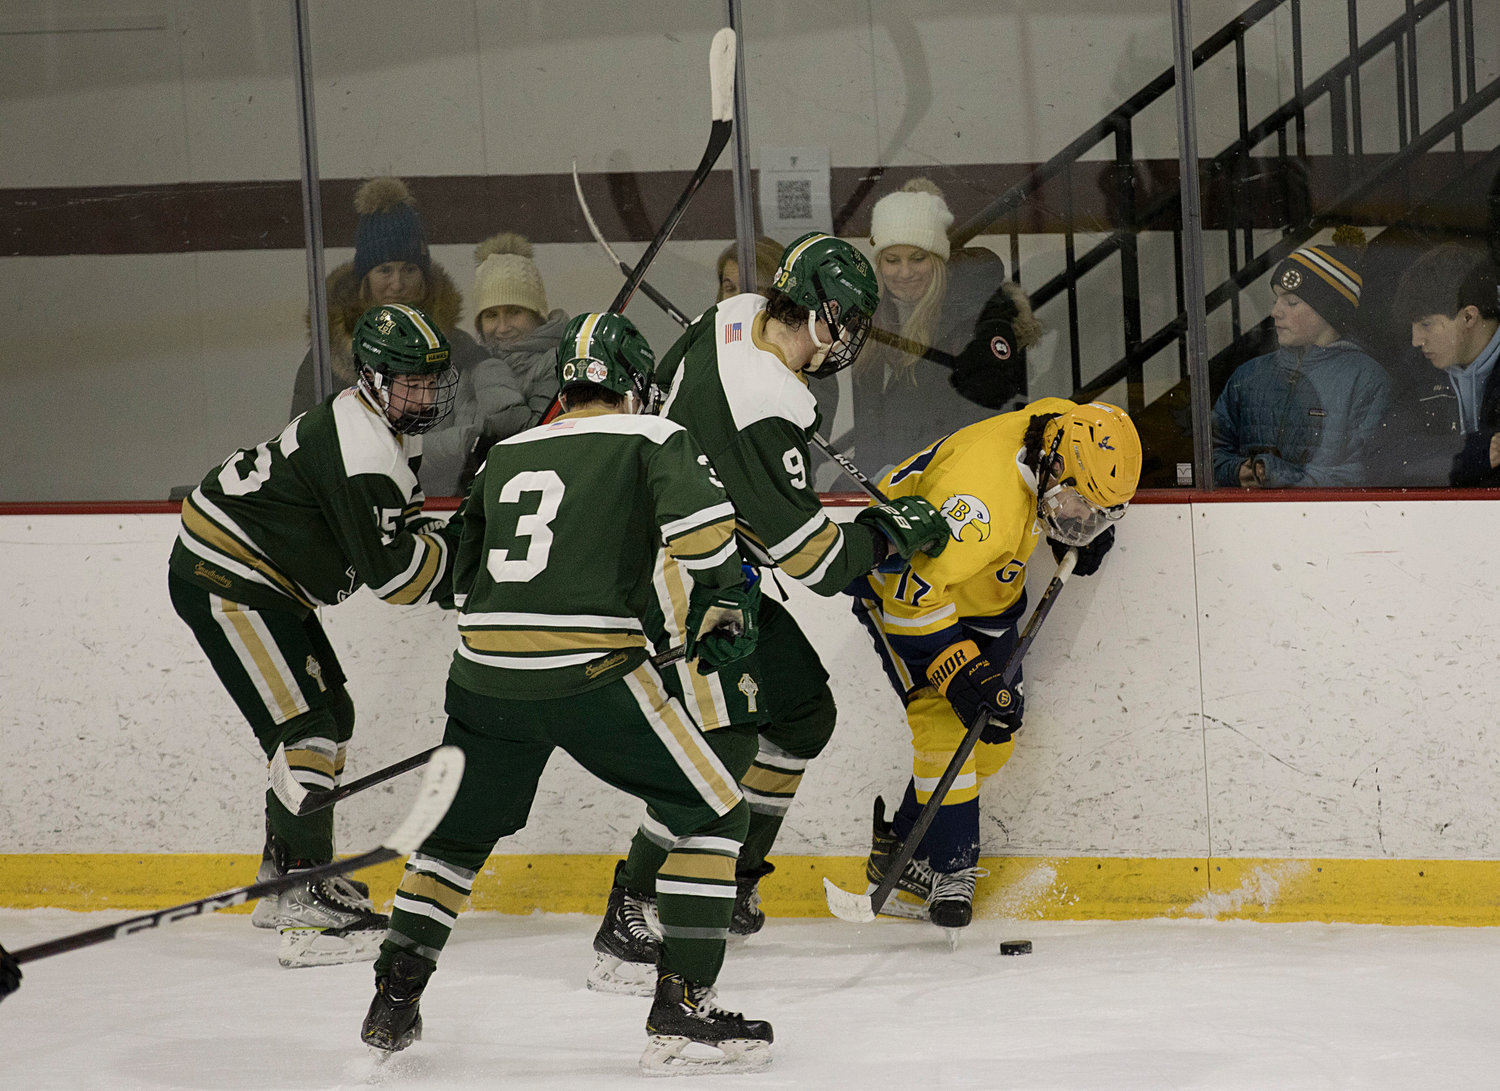 Drake Almeida is pressured by a trio of Hendricken defenders while in control of the puck.